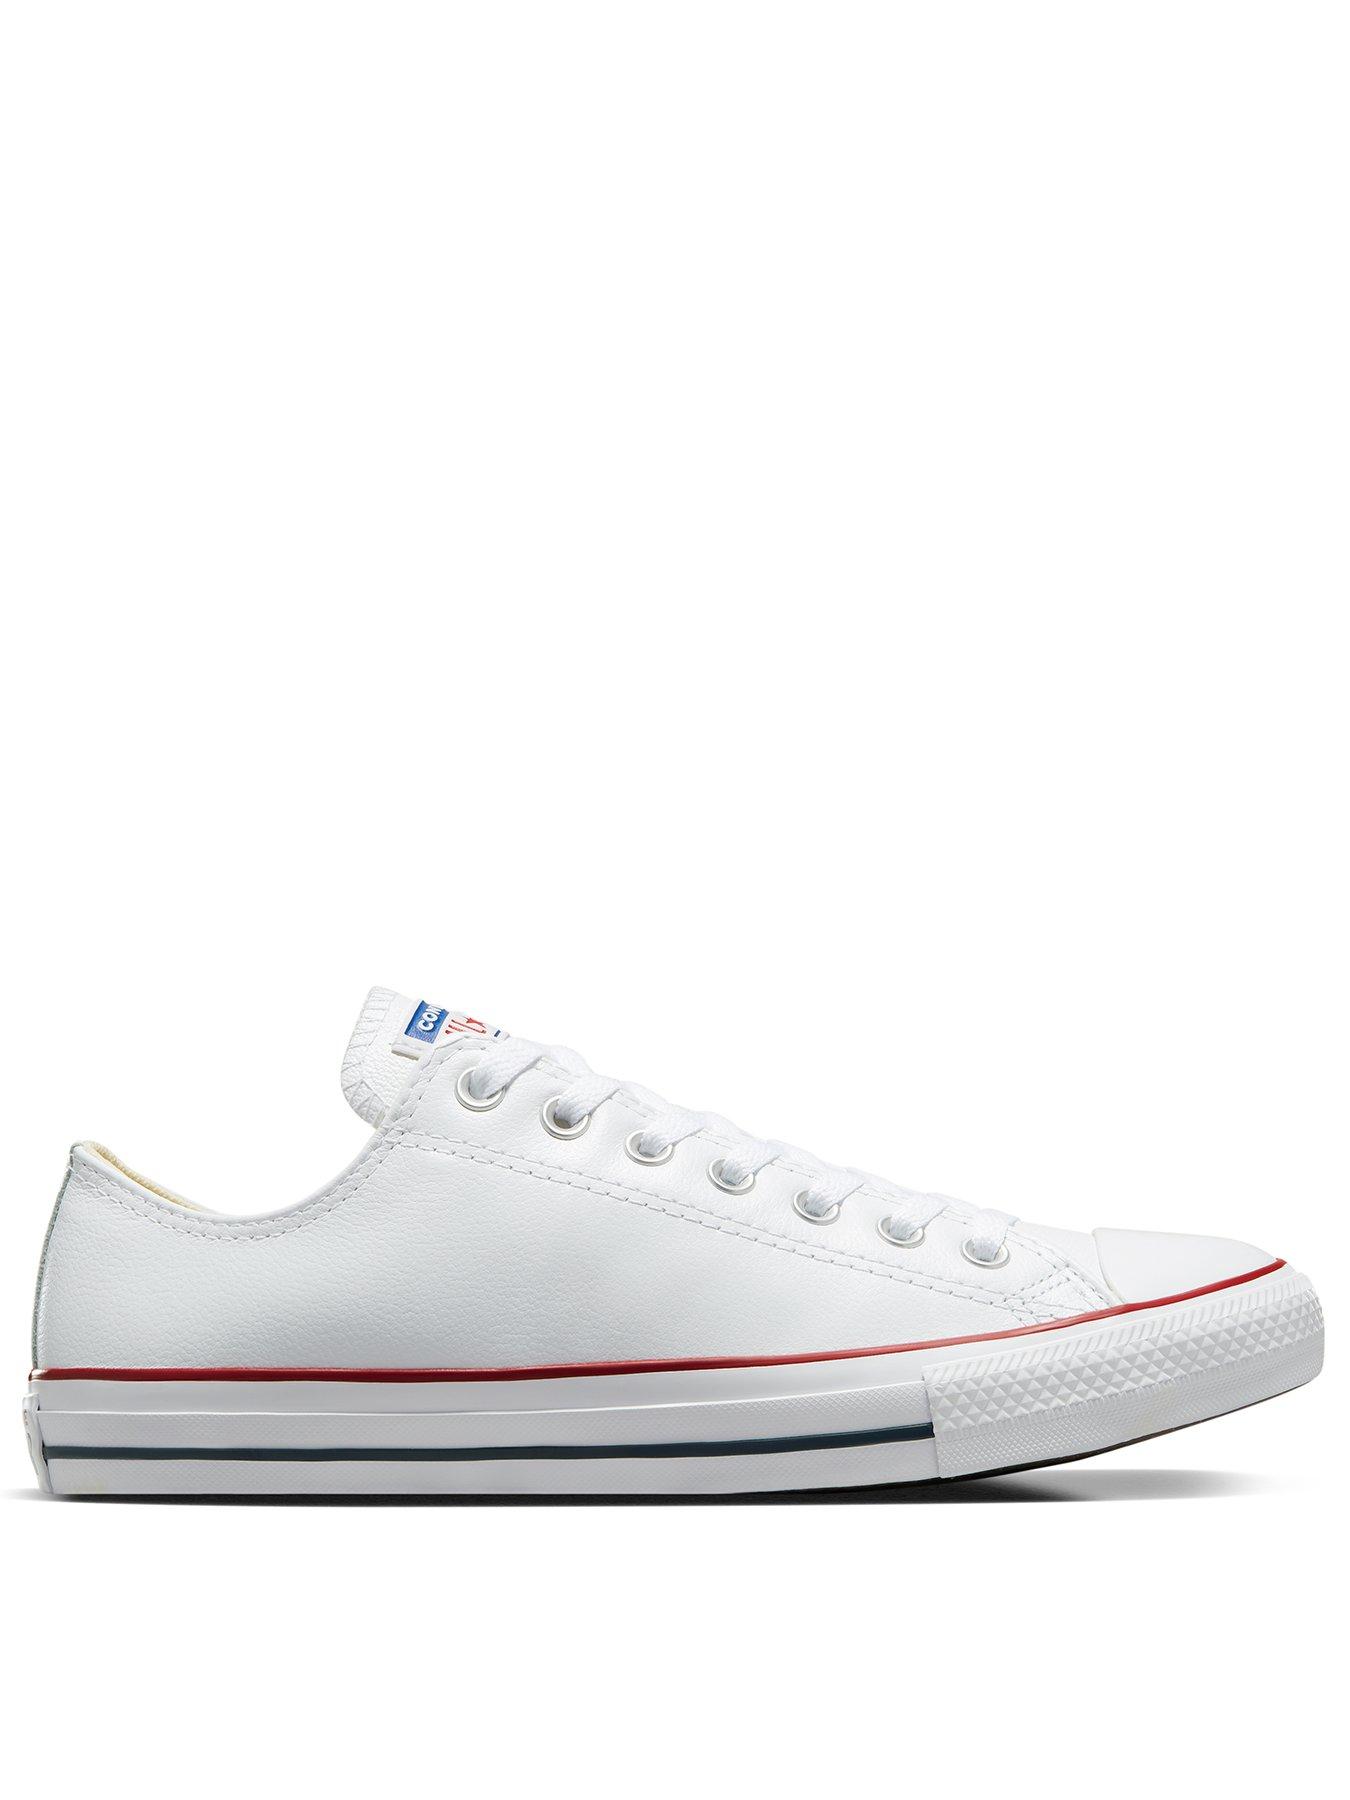 ladies leather converse trainers